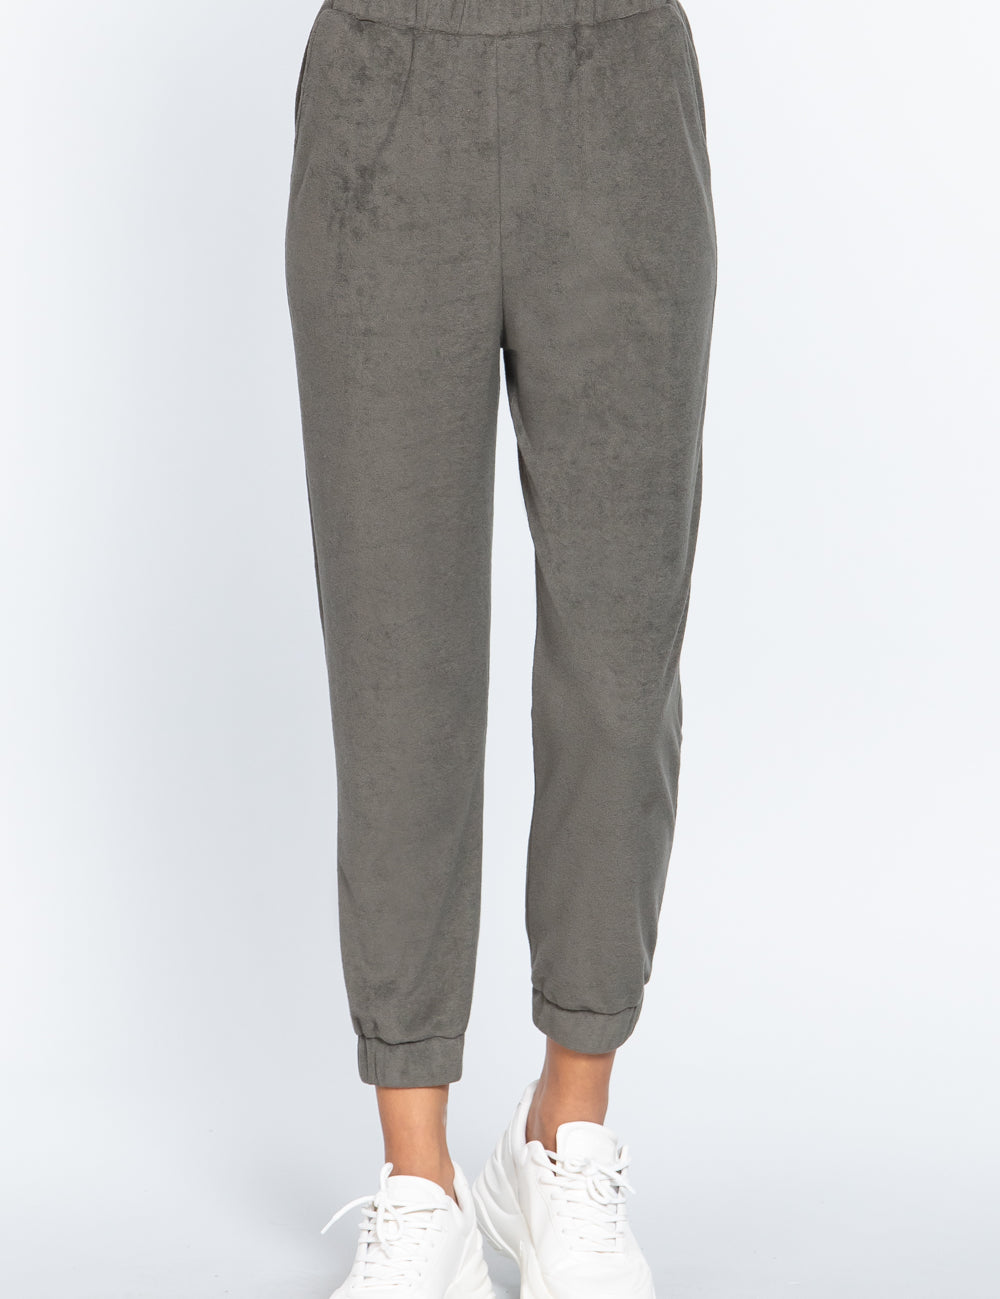 Terry Towelling Long Jogger Pants